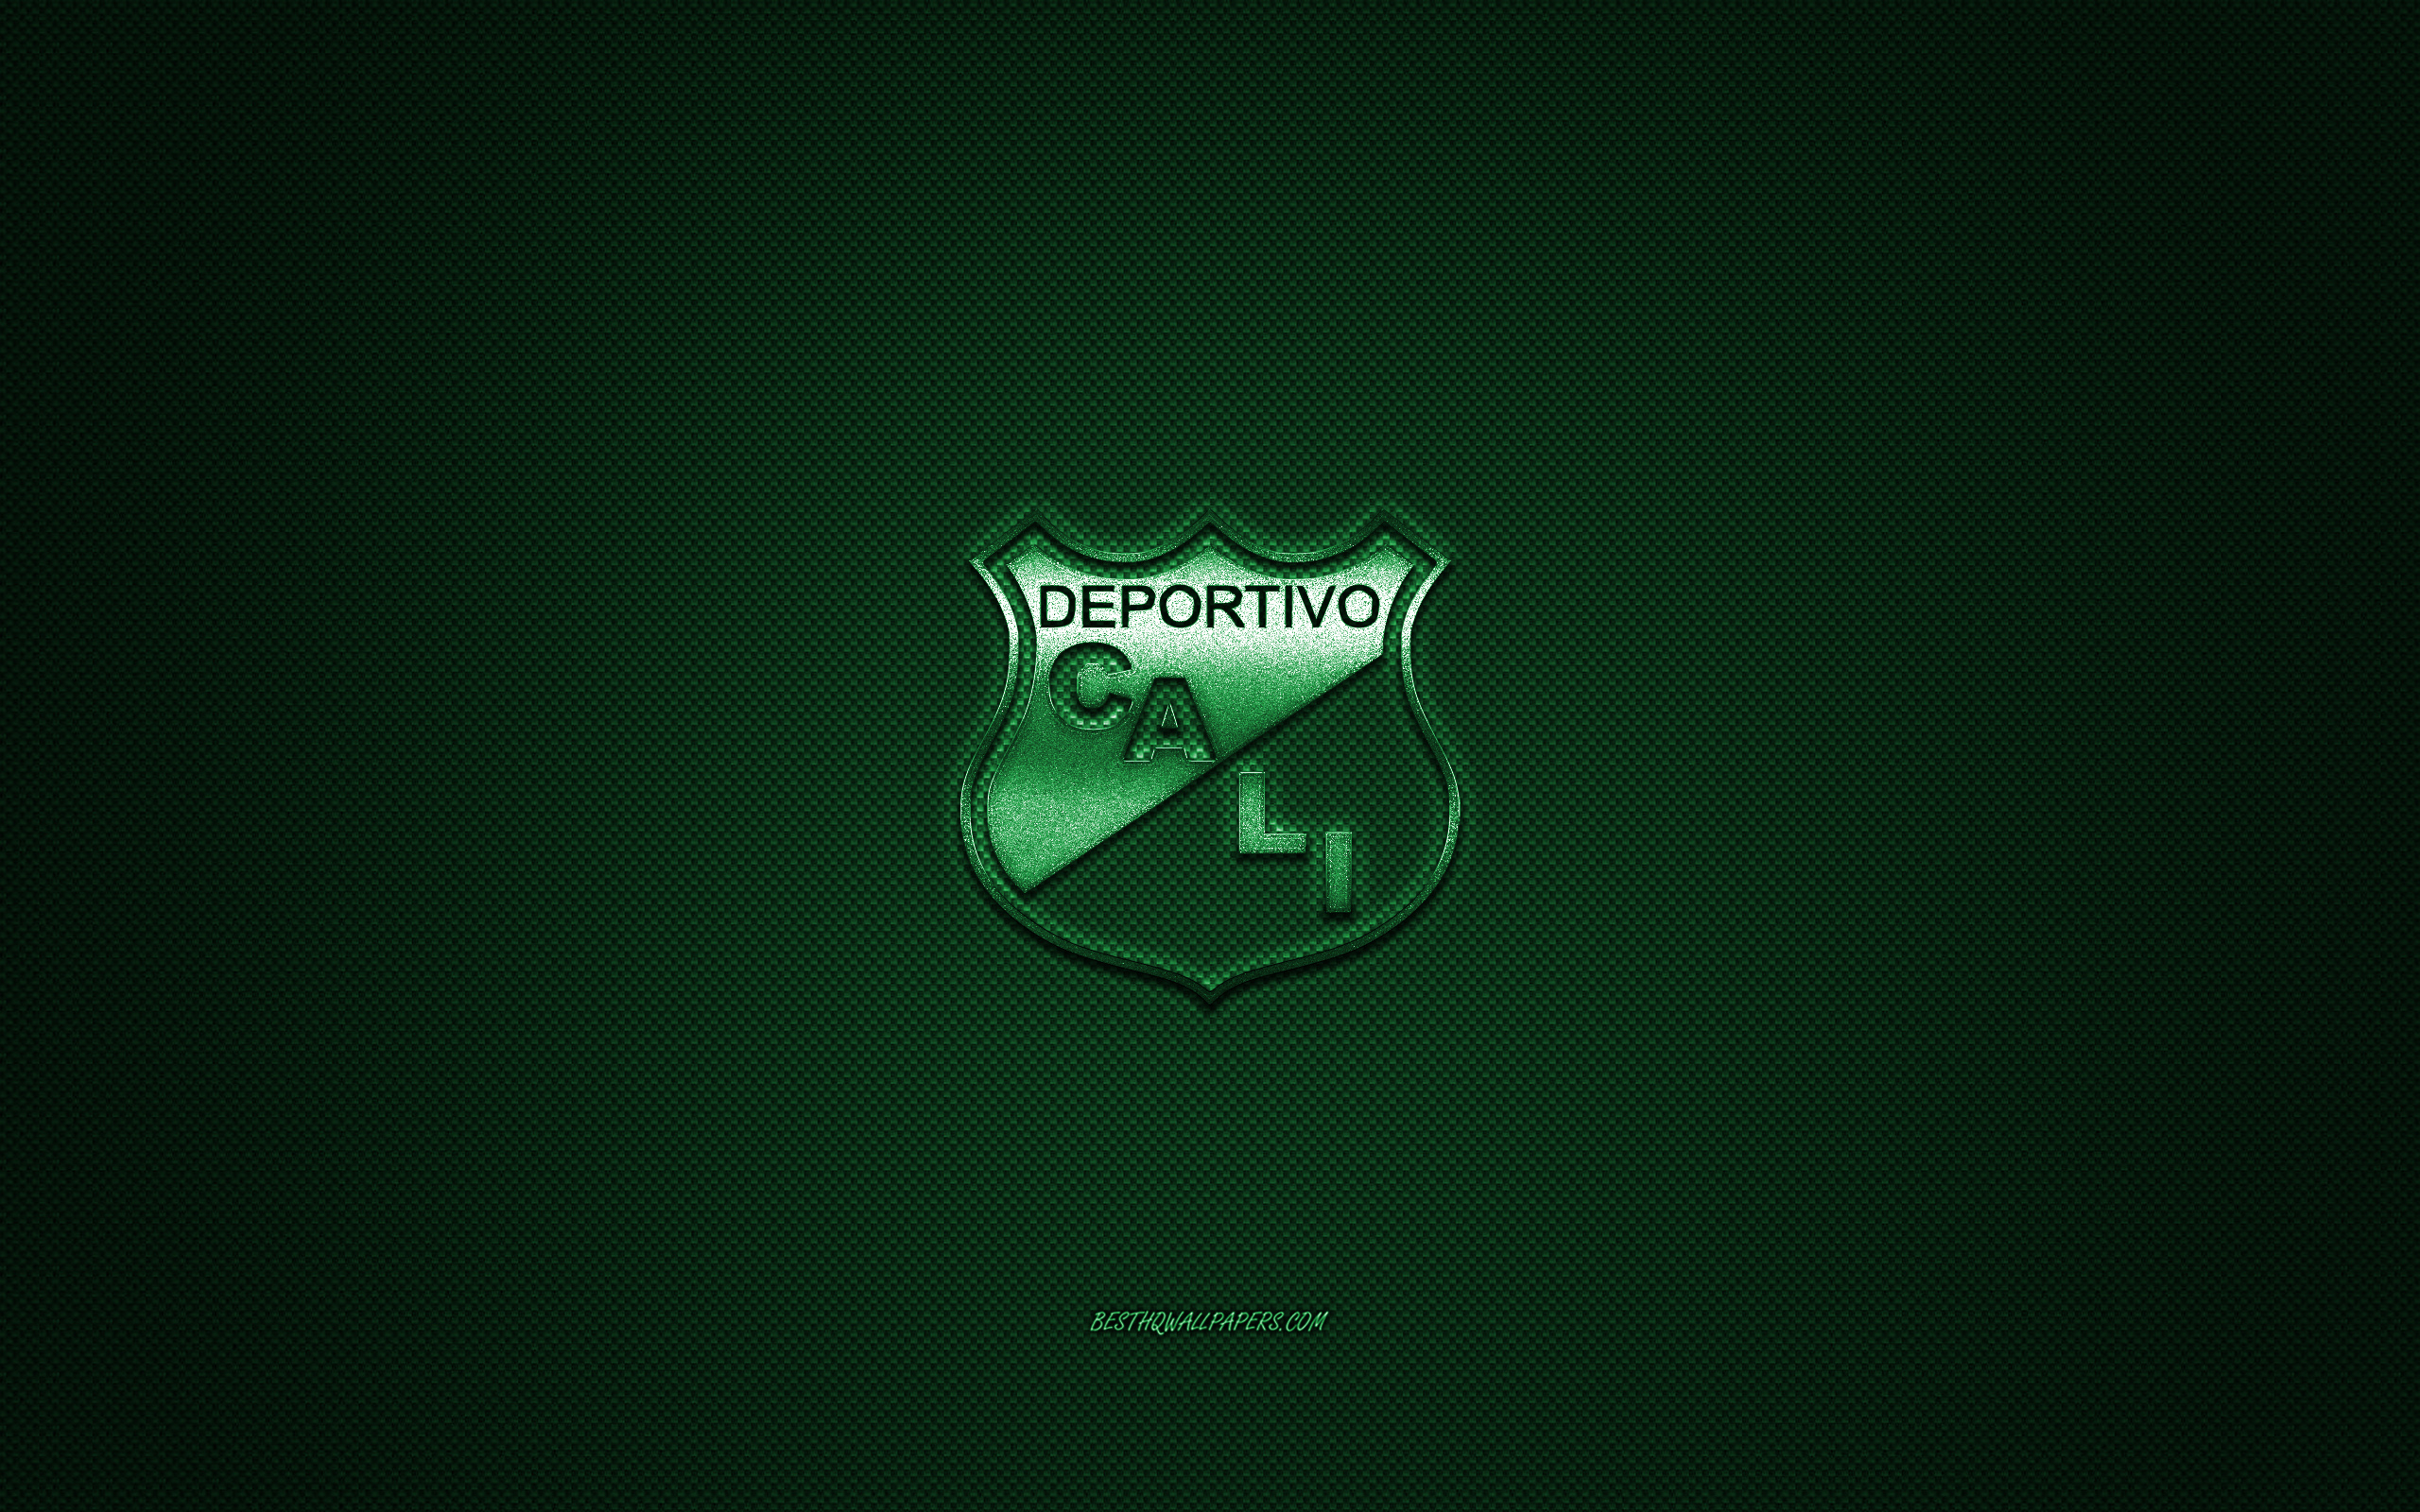 Download wallpaper Deportivo Cali, Colombian football club, green logo, green carbon fiber background, Categoria Primera A, football, Cali, Colombia, Deportivo Cali logo for desktop with resolution 2560x1600. High Quality HD picture wallpaper